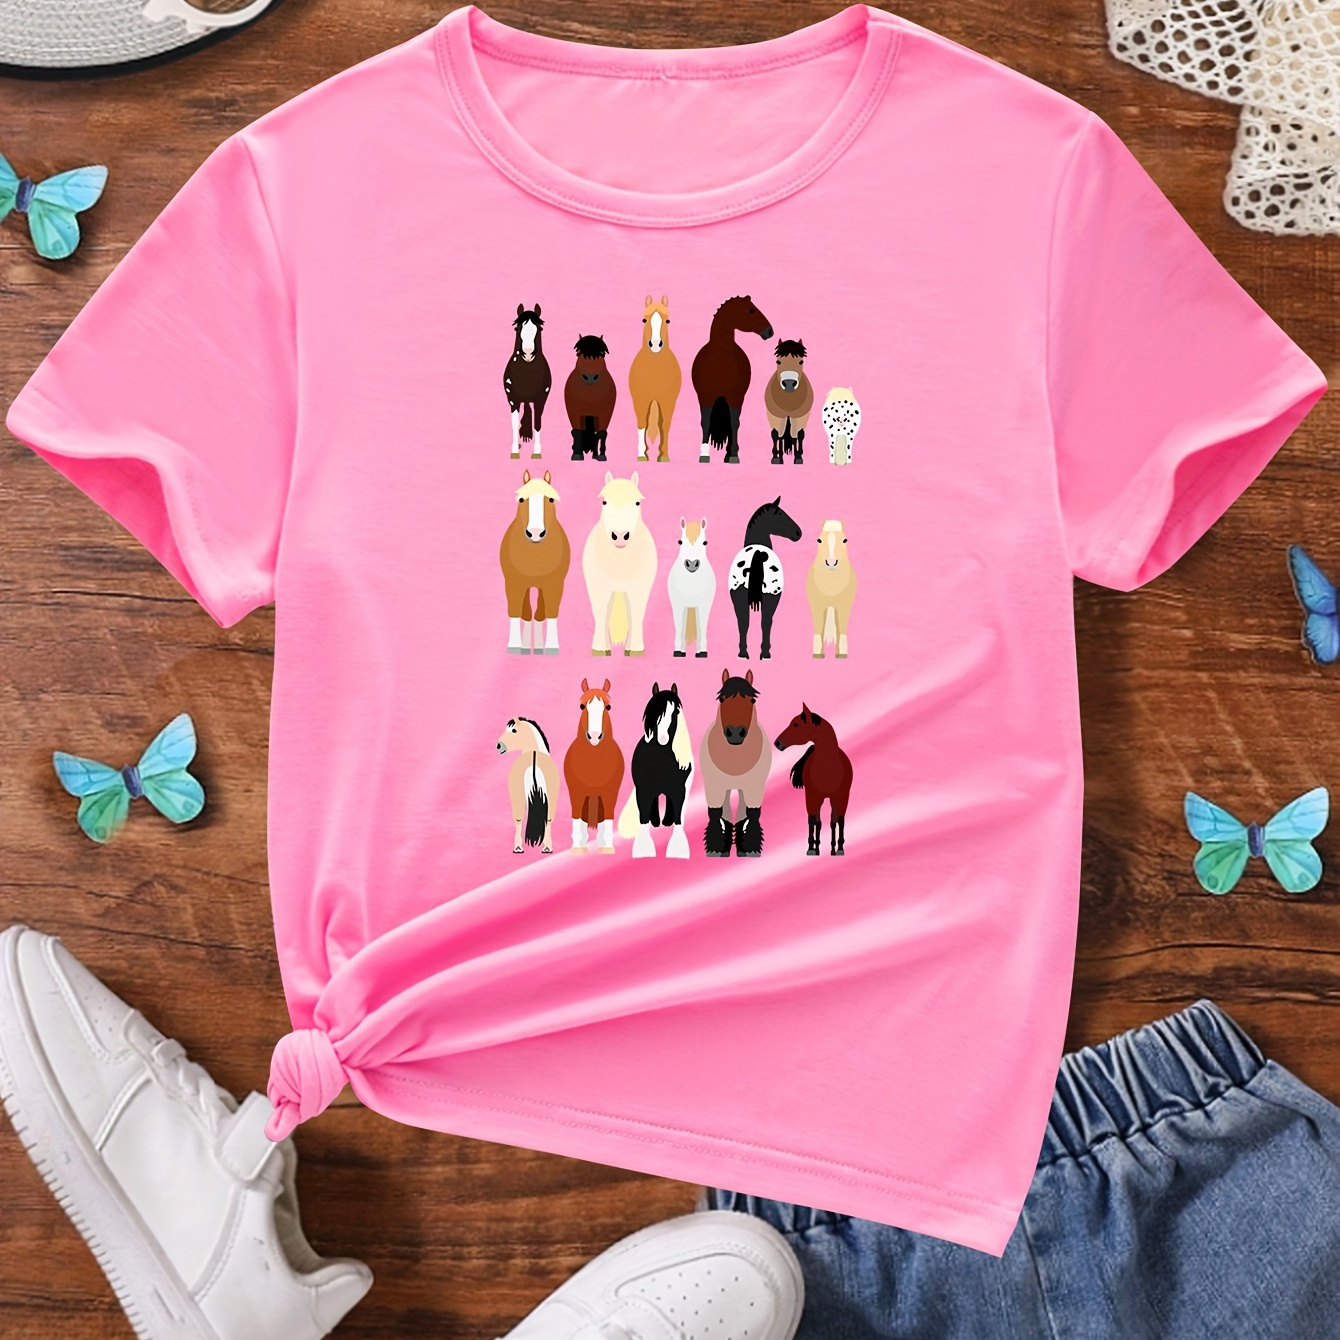 

Girls T-shirt With Cartoon Horse Print, Casual Comfort Crew Neck, Summer Tee, Various Playful Equine Designs, Relaxed Fit